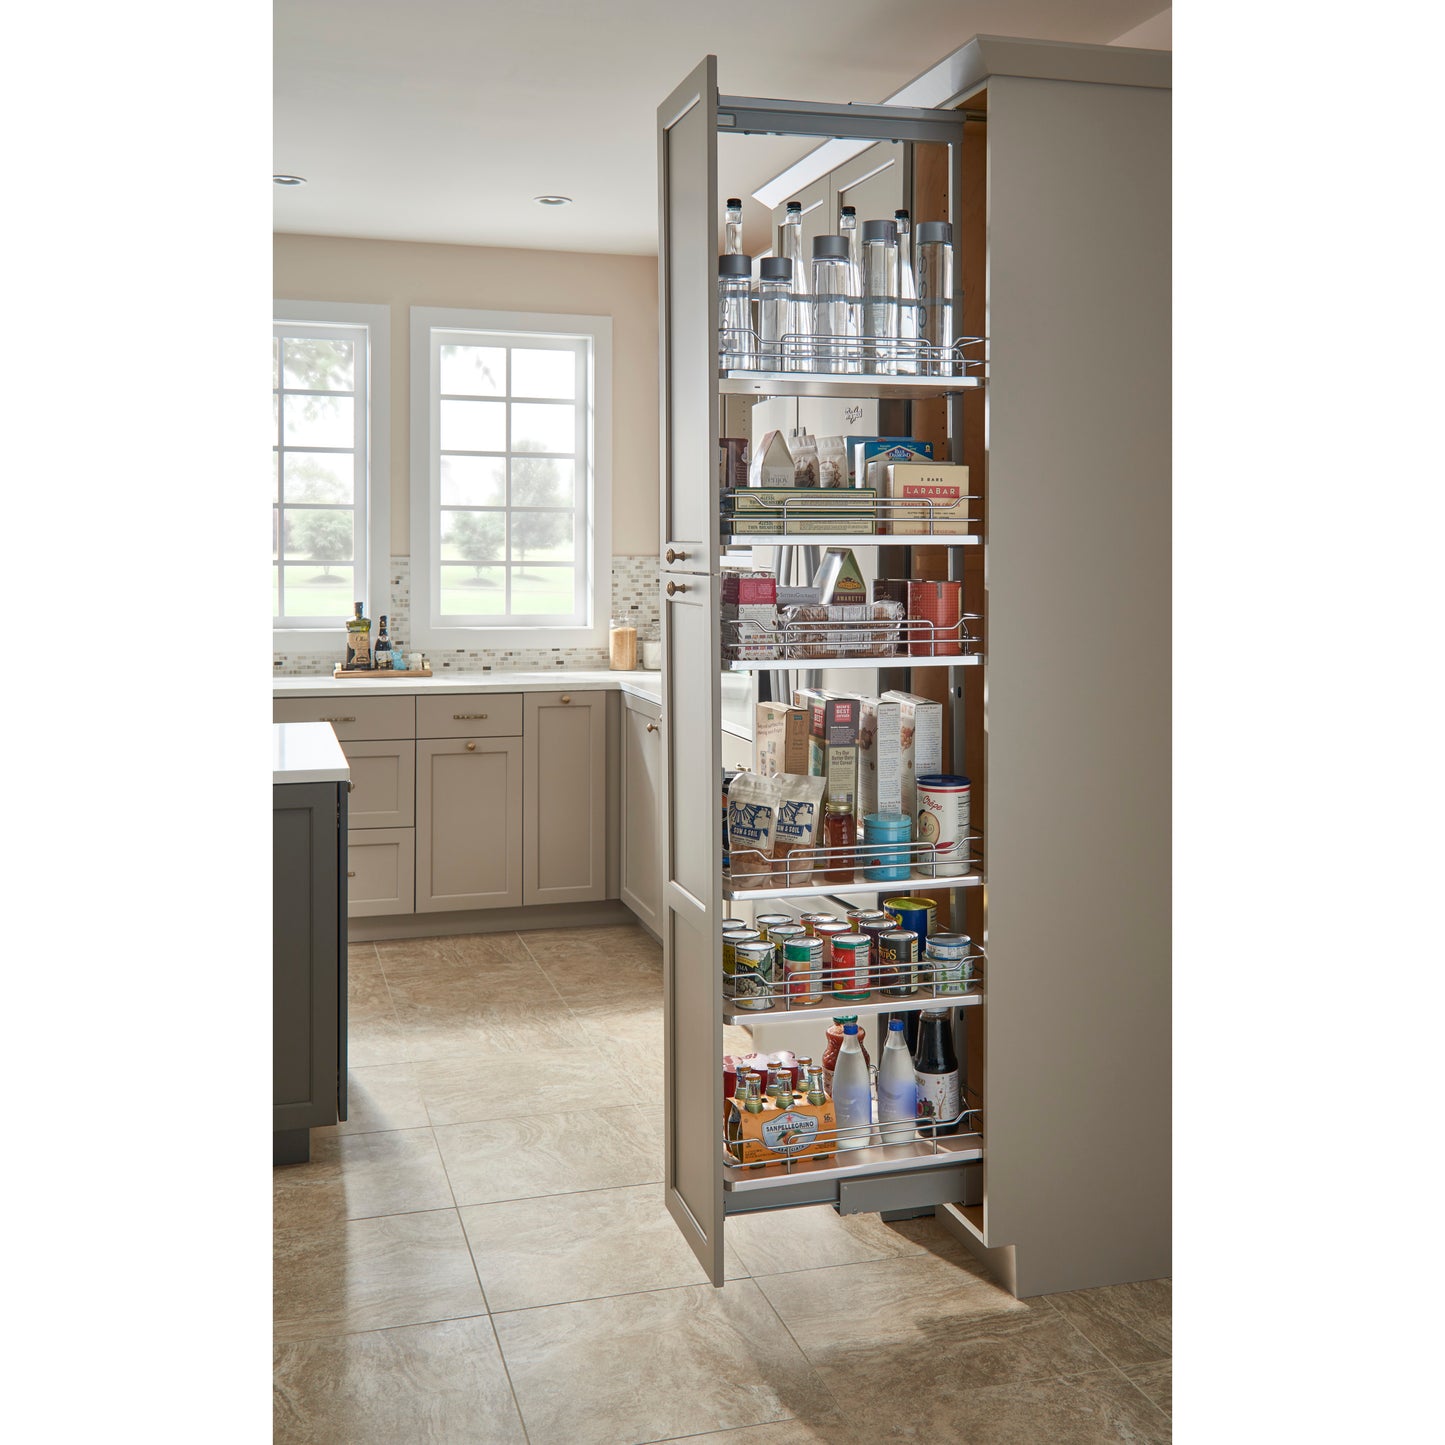 Rev-A-Shelf - Adjustable Solid Surface Pantry System for Tall Pantry Cabinets - 5343-08-GR